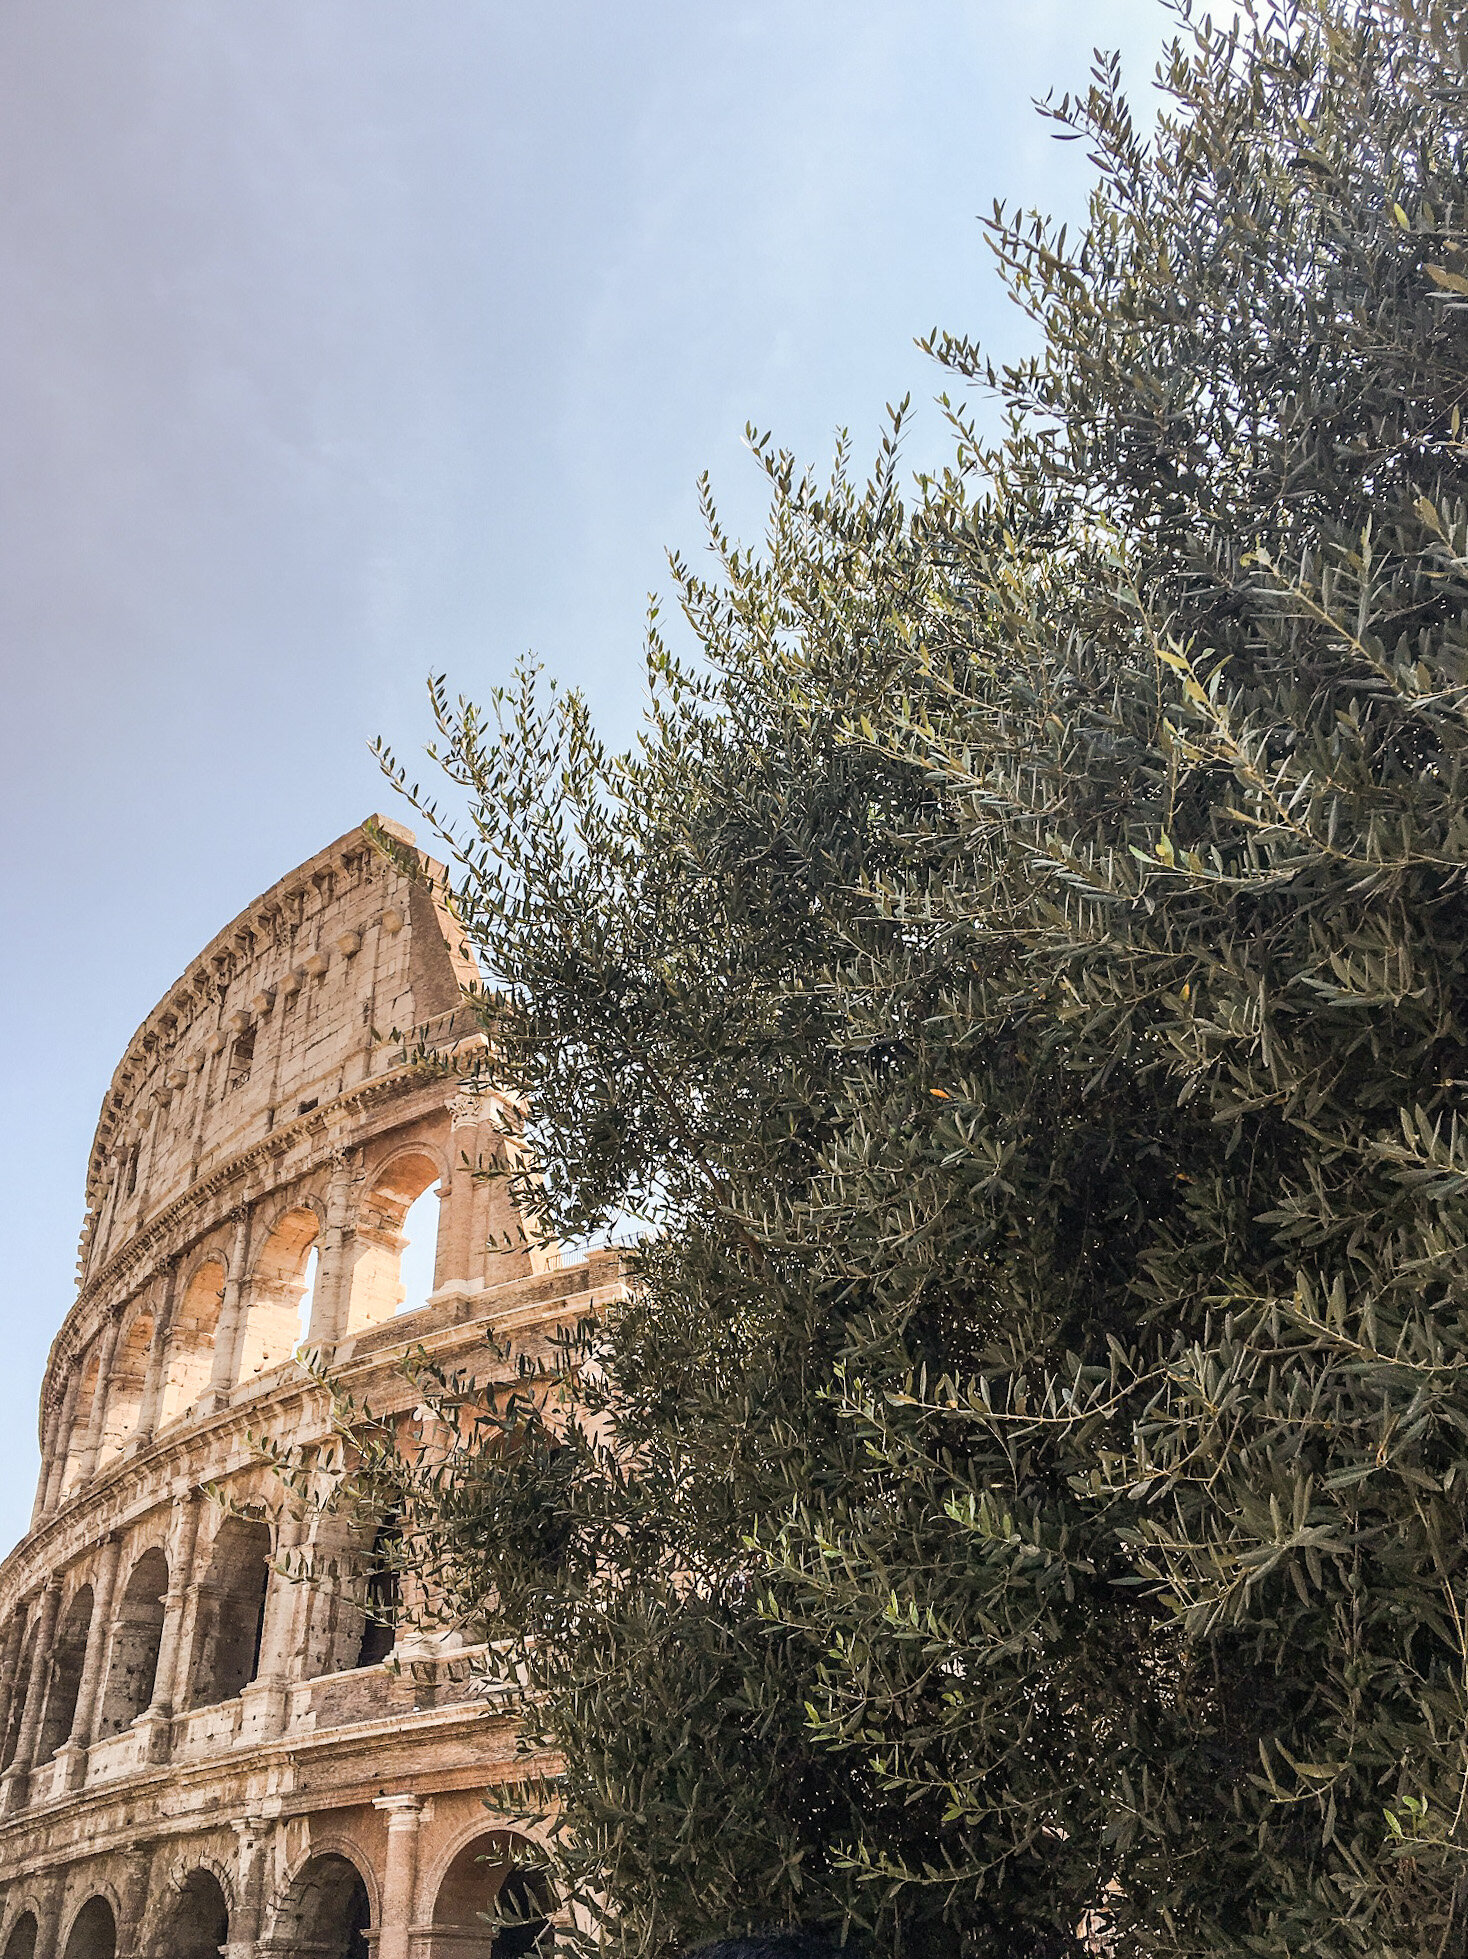 Colosseum, Rome, Italy | Blooming Magnolias Blog | Travel 